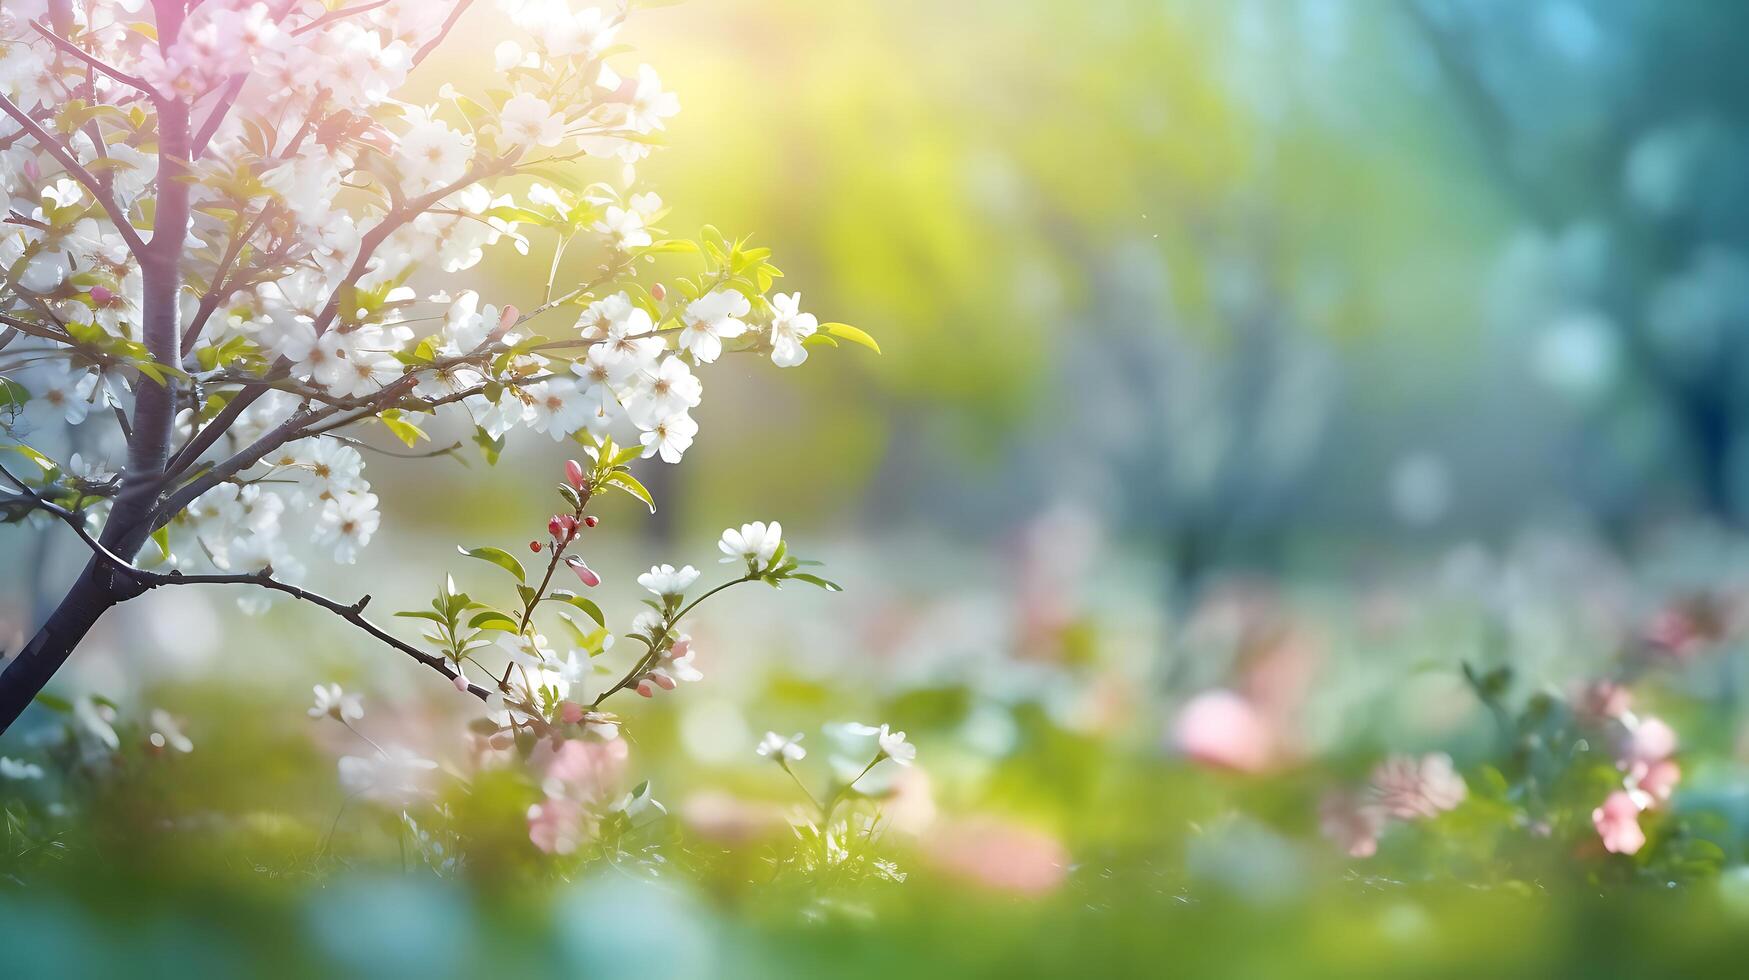 Blurred spring background nature with blooming glade, Technology photo